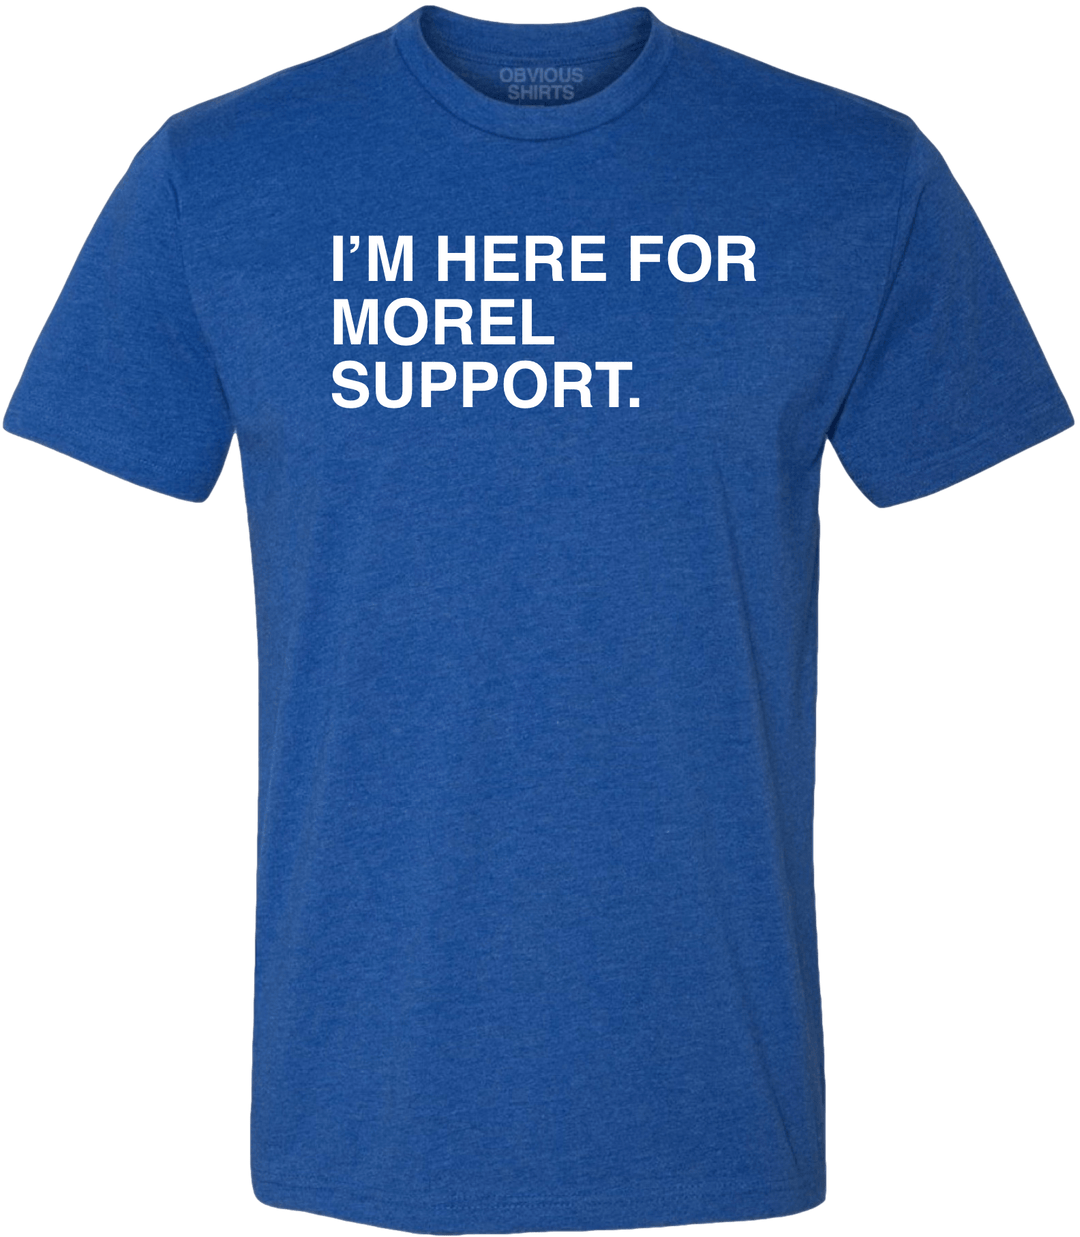 I'M HERE FOR MOREL SUPPORT. - OBVIOUS SHIRTS.